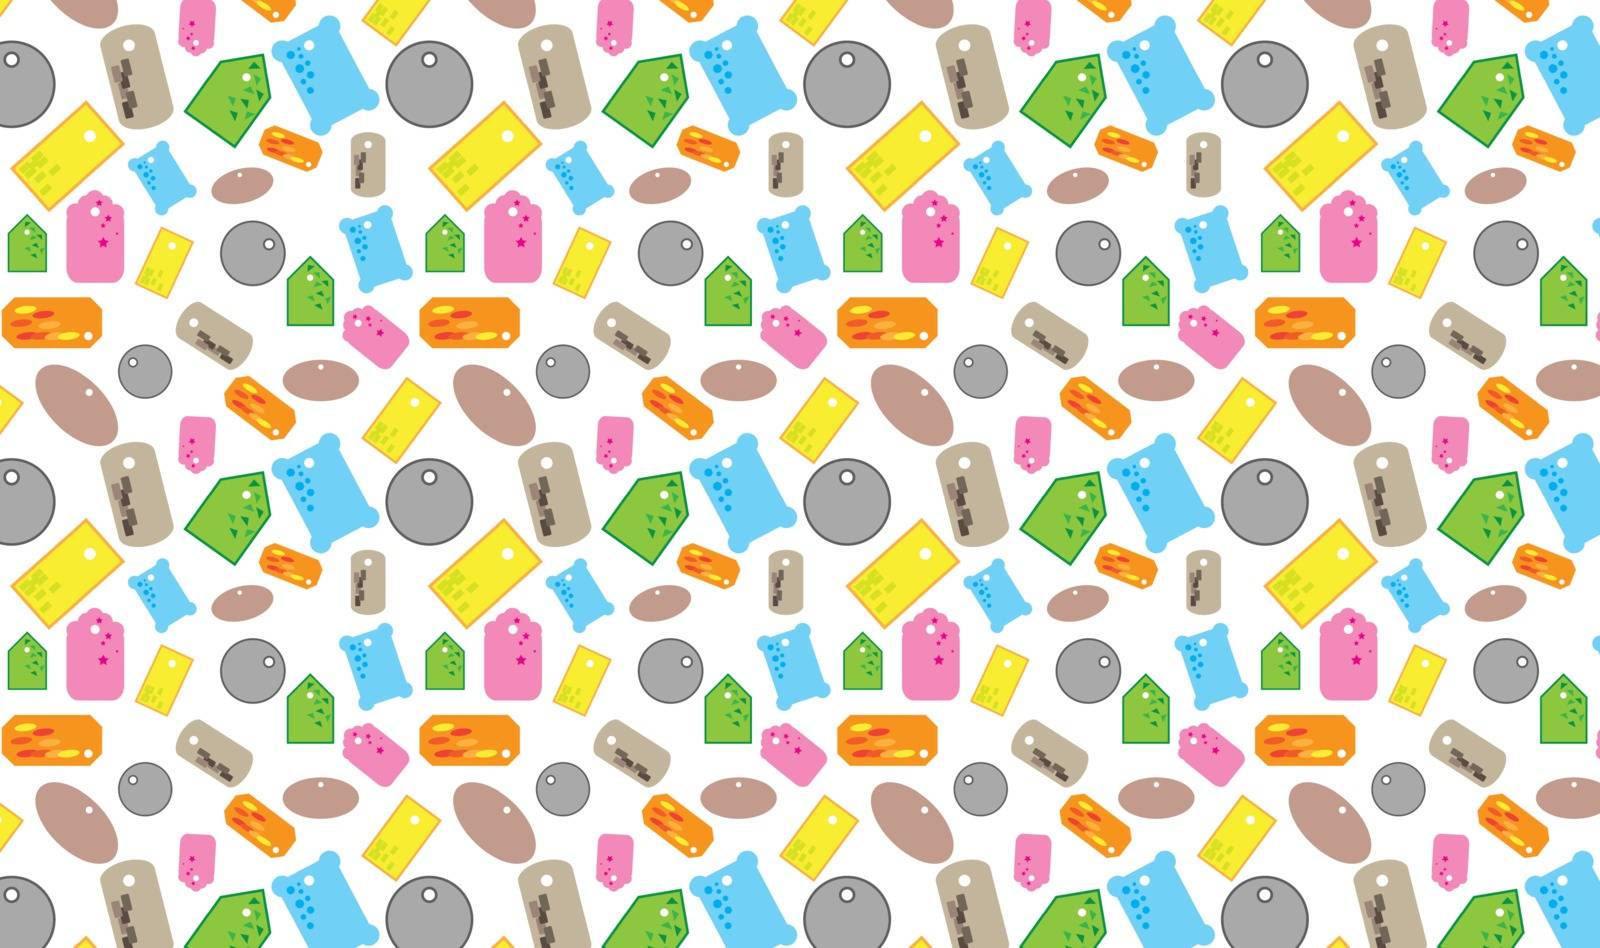 Seamless wallpaper pattern from price tags.